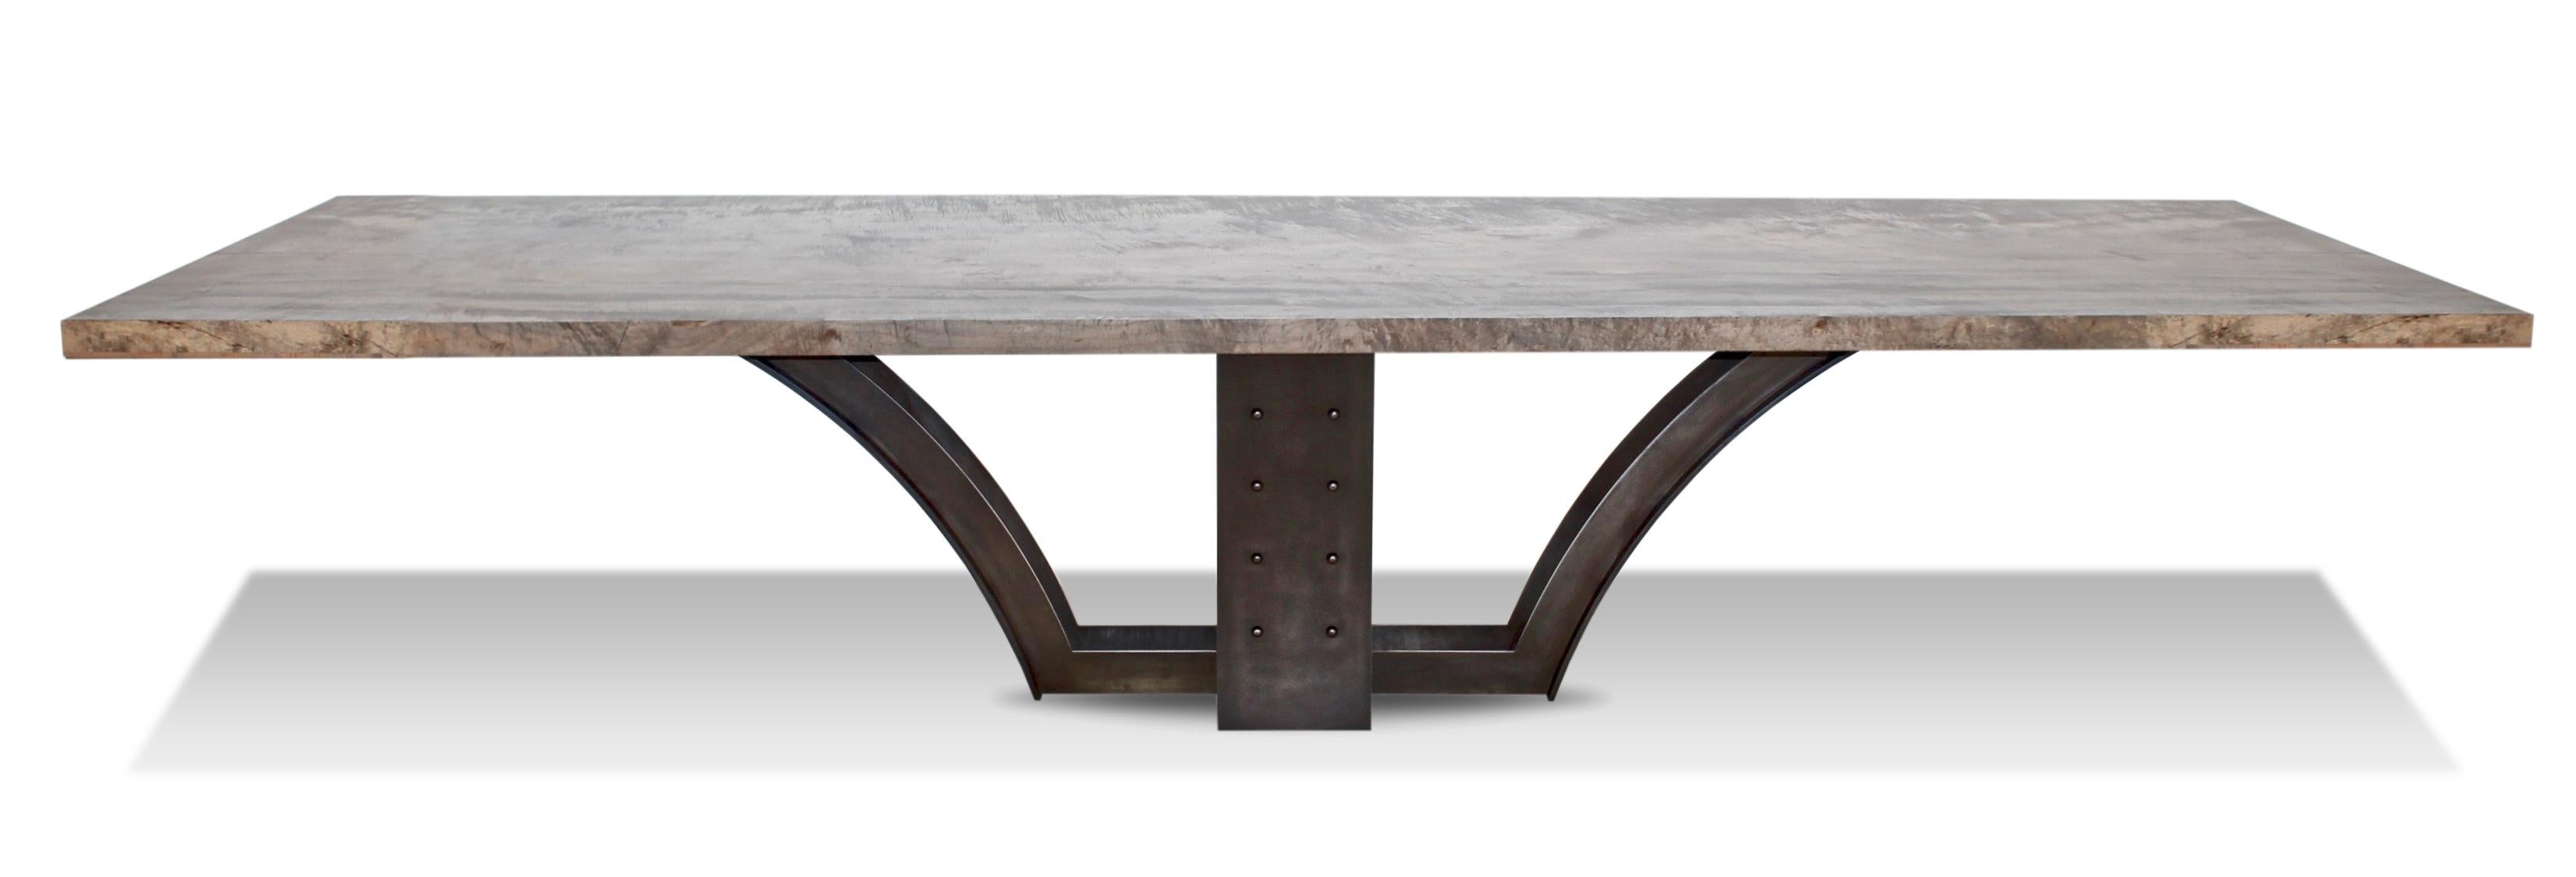 American Oxidized Maple Slab Dining Table with Blackened Steel Base by Mark Jupiter For Sale